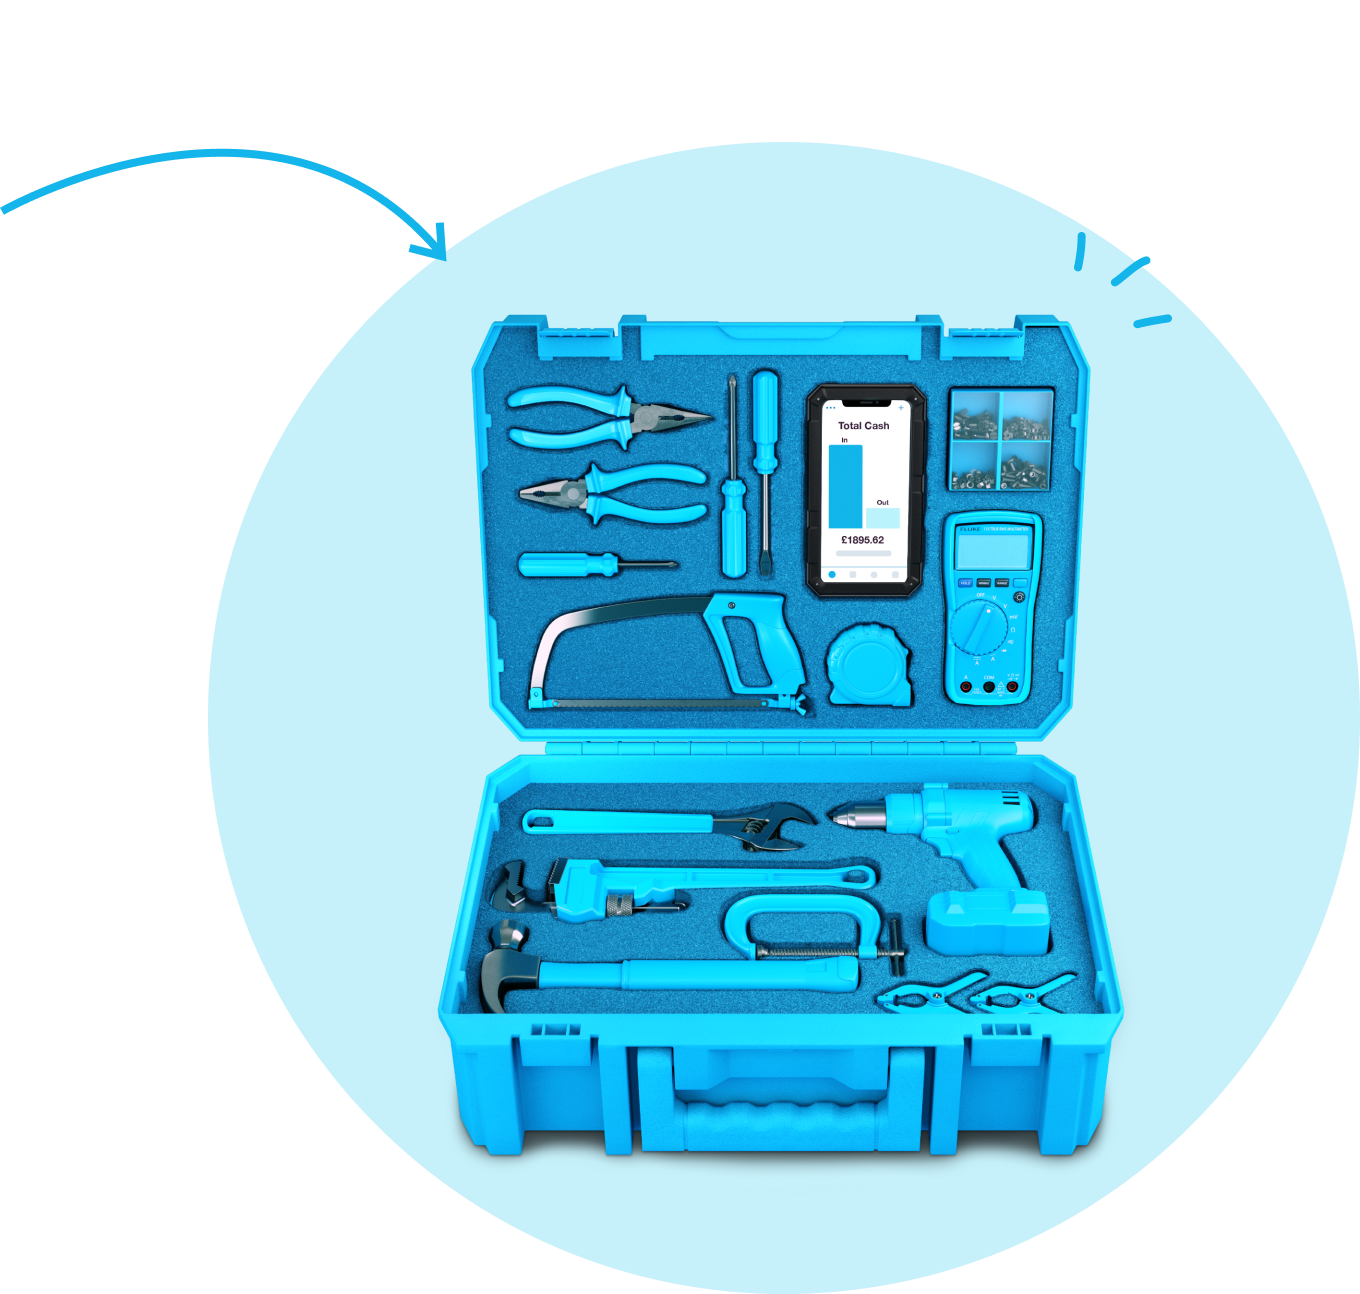 Toolbox filled with tools and a mobile phone with the Xero app open